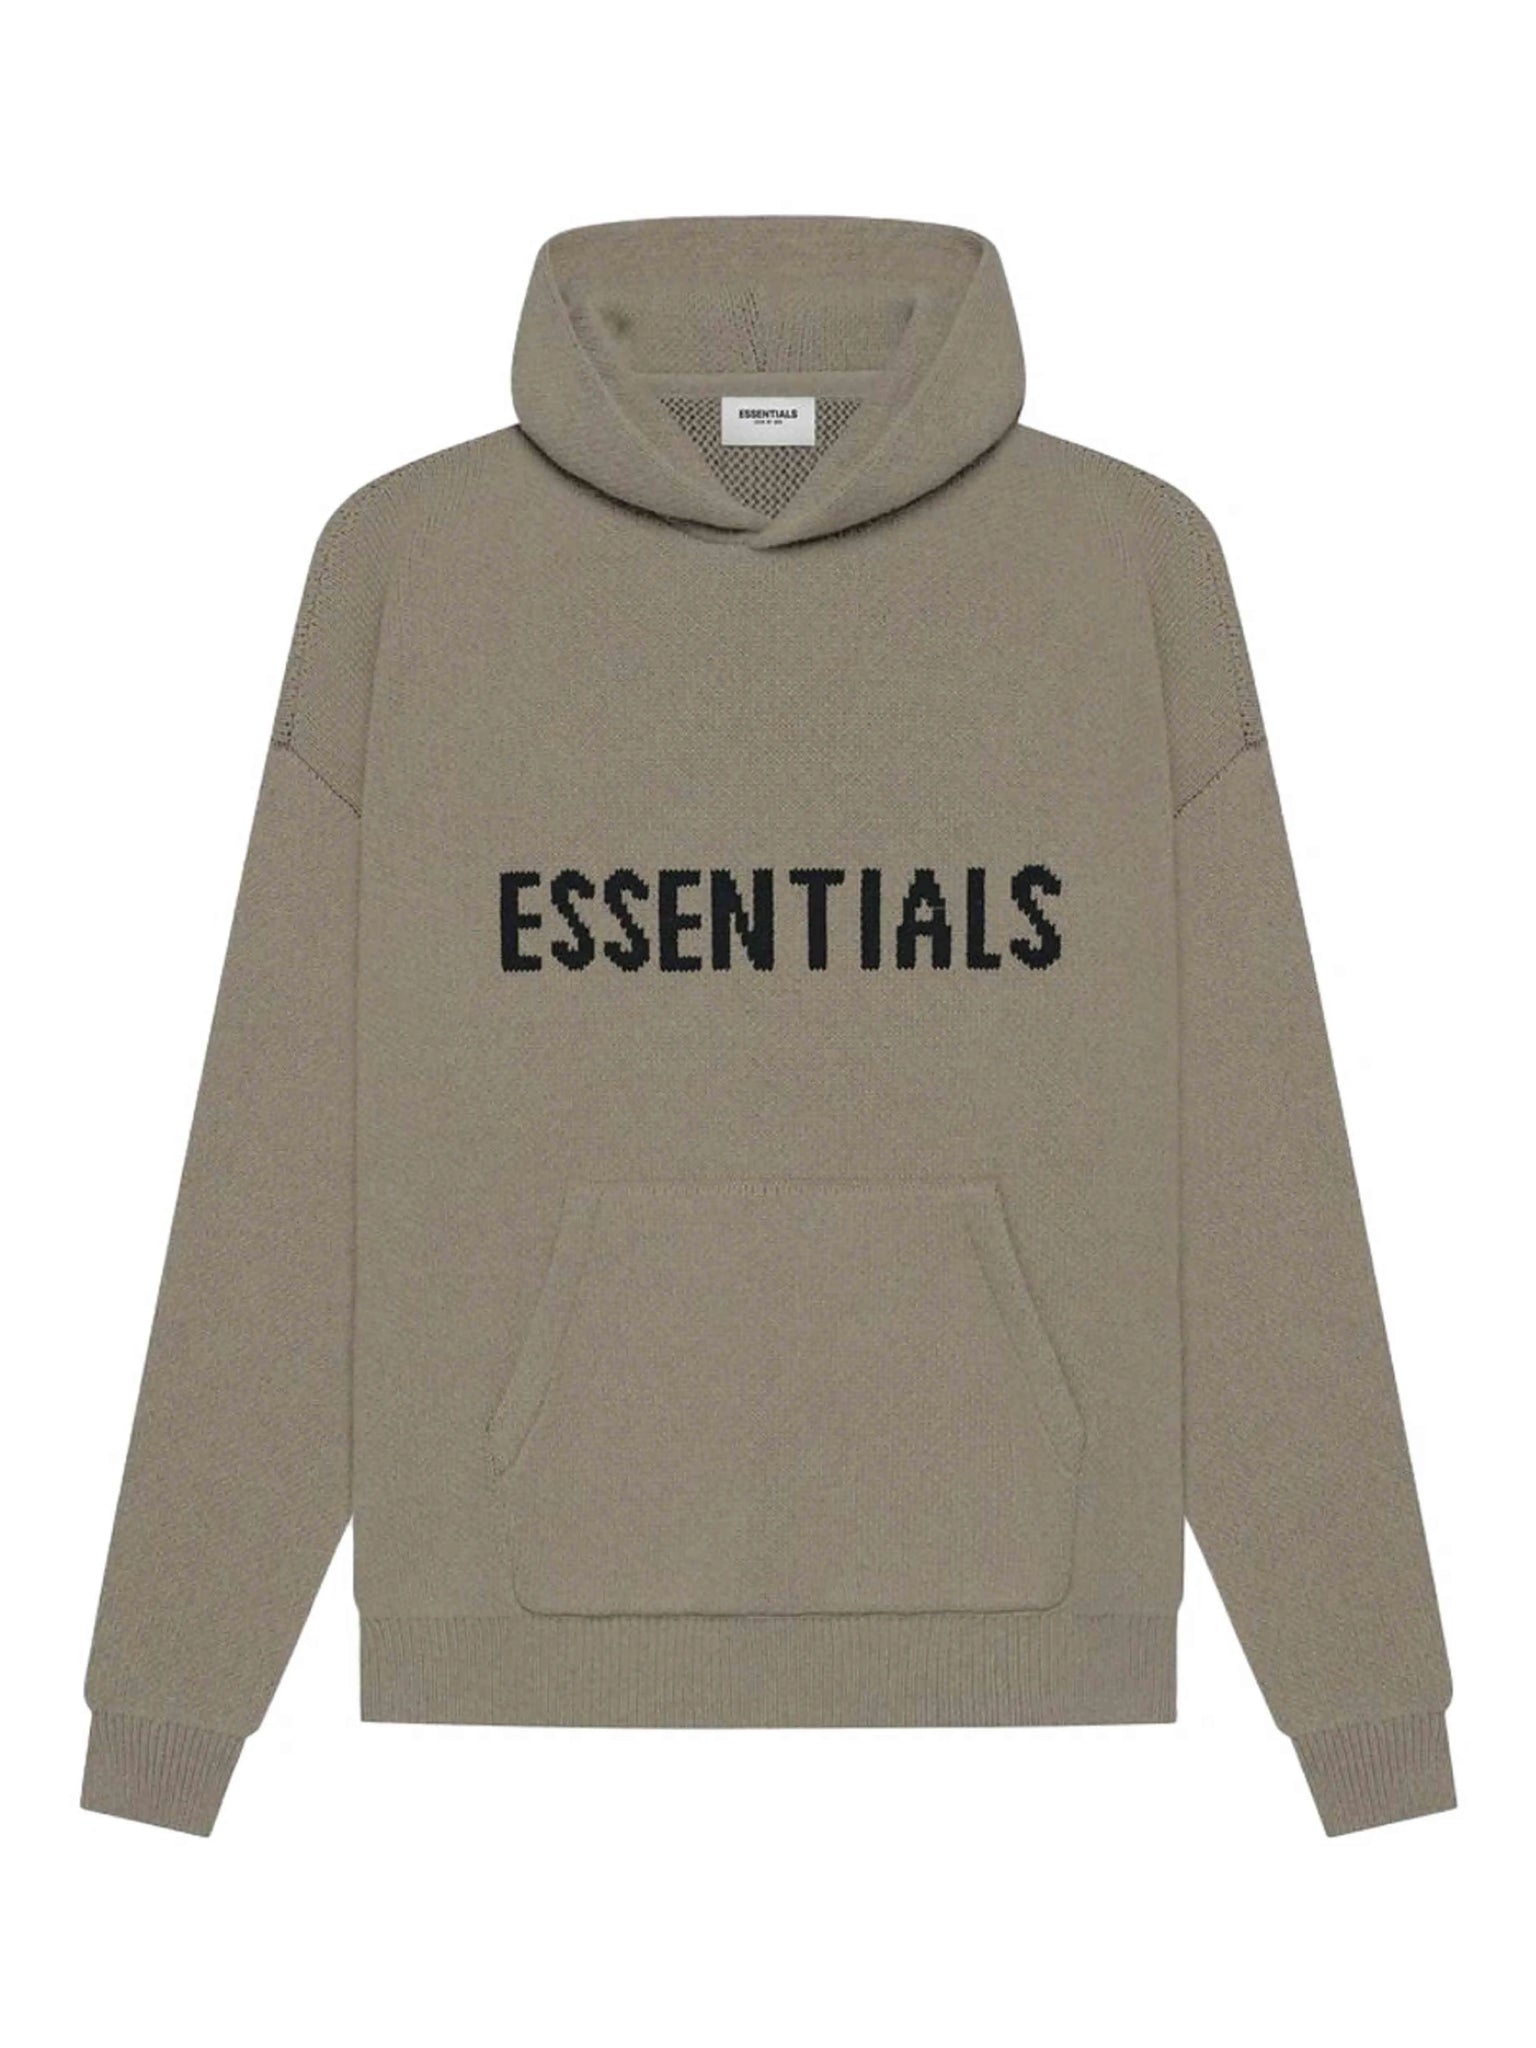 Fear Of God Essentials Knit Pullover Hoodie Taupe [SS21] Prior